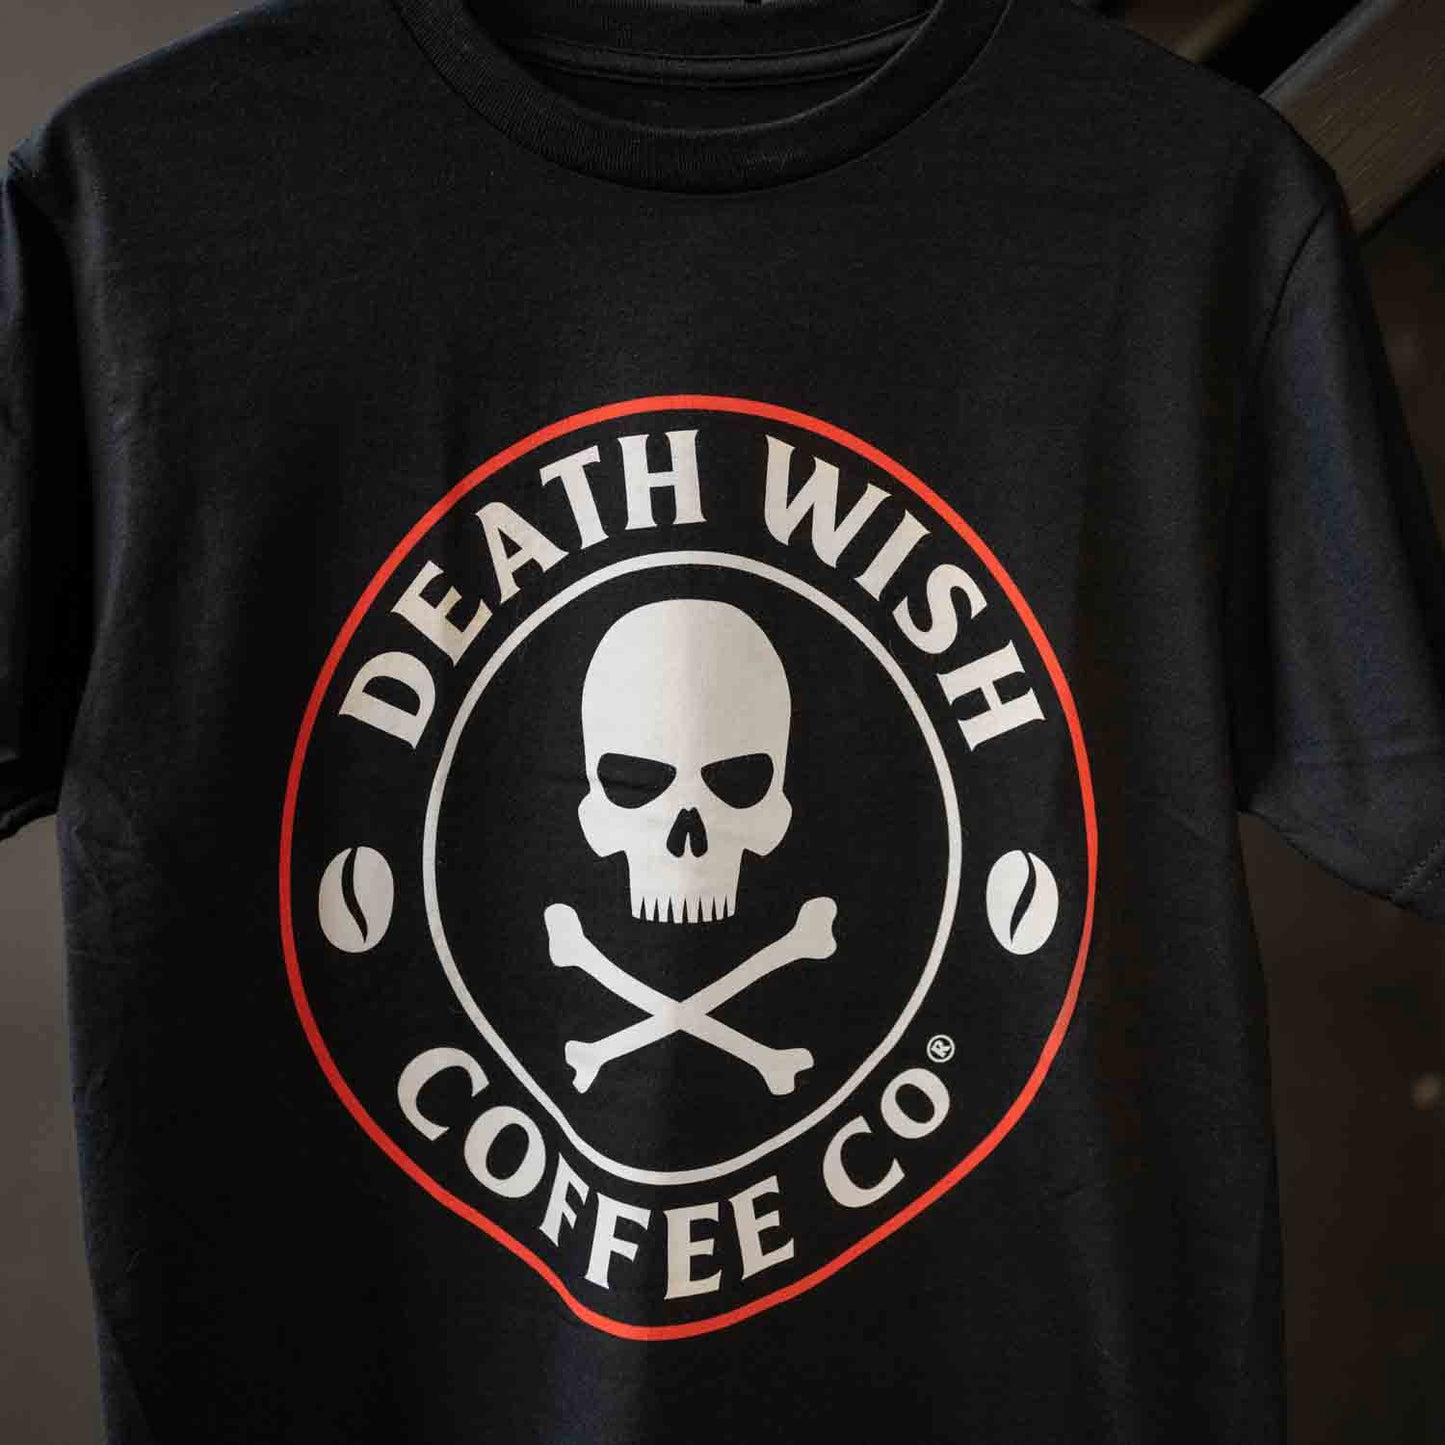 Death Wish Coffee Core Classic Logo Tee - Chest Detail.